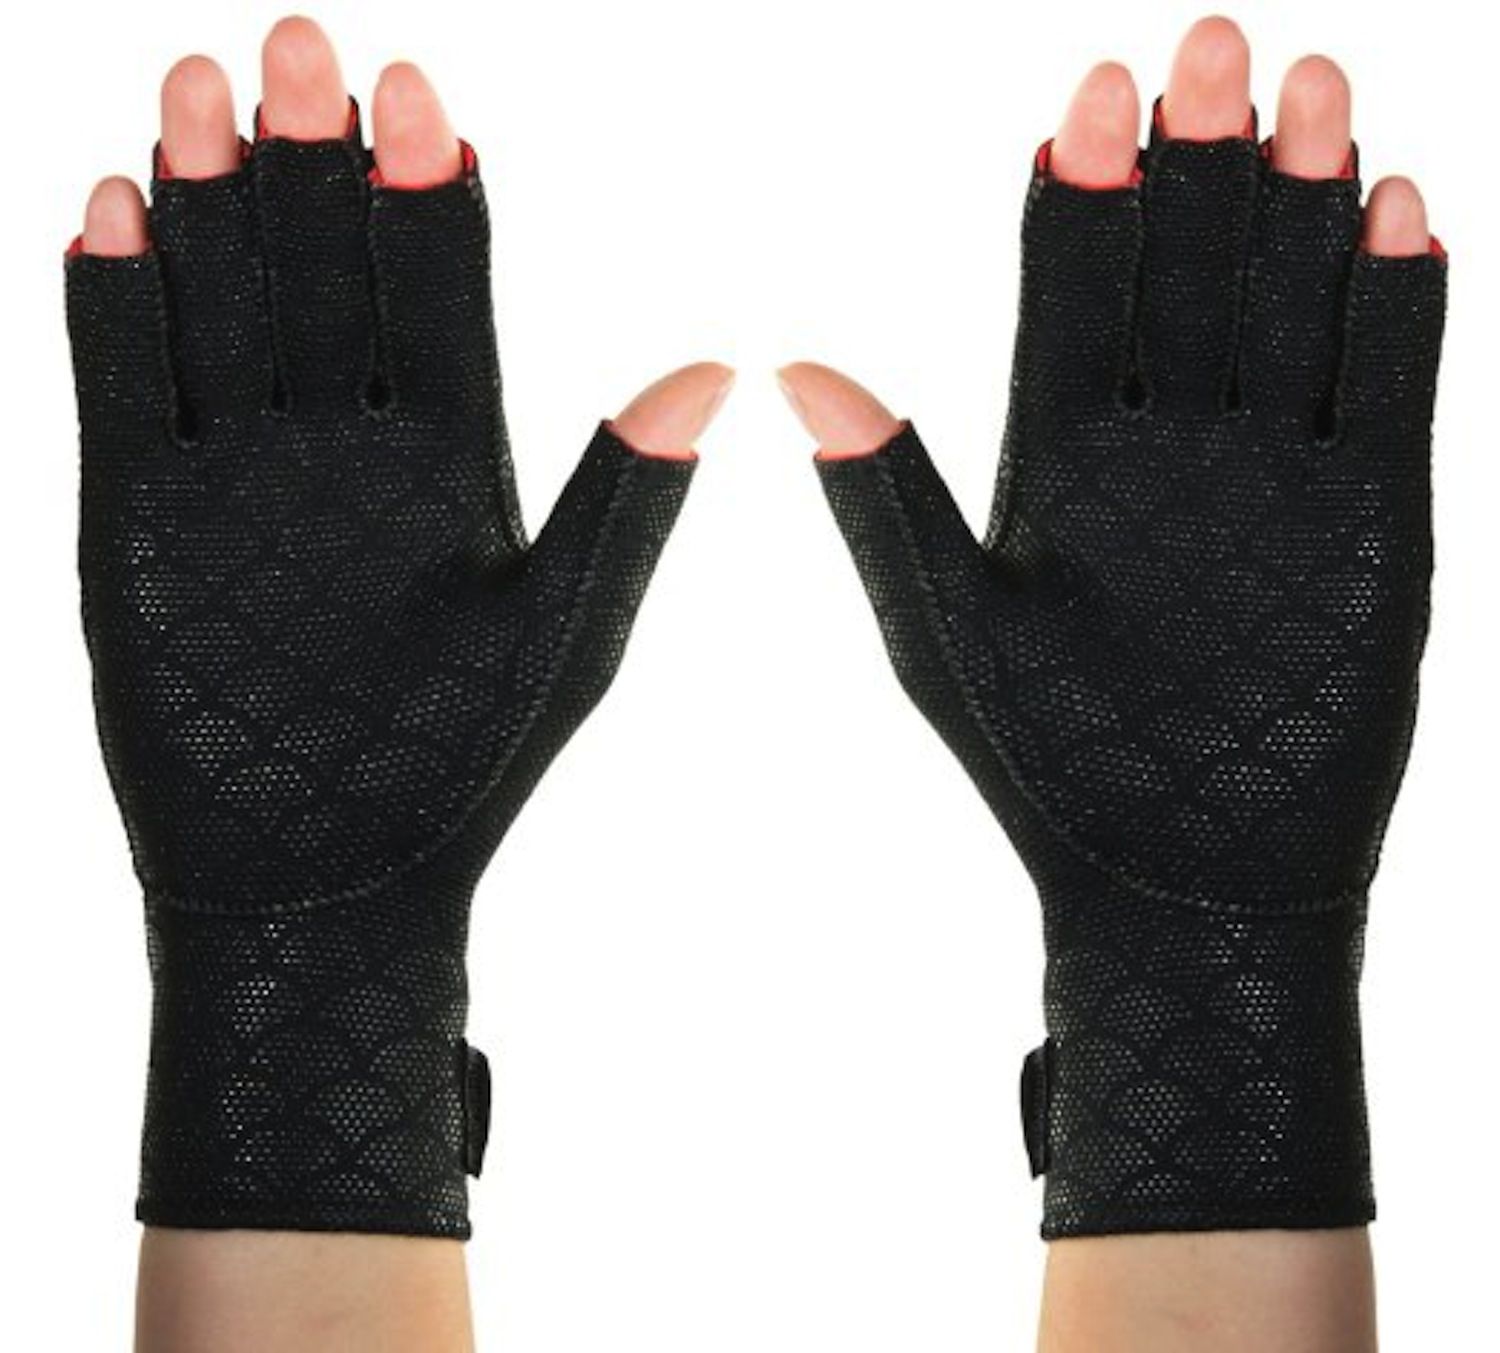 3 Best Arthritis Gloves for Relieving Pain